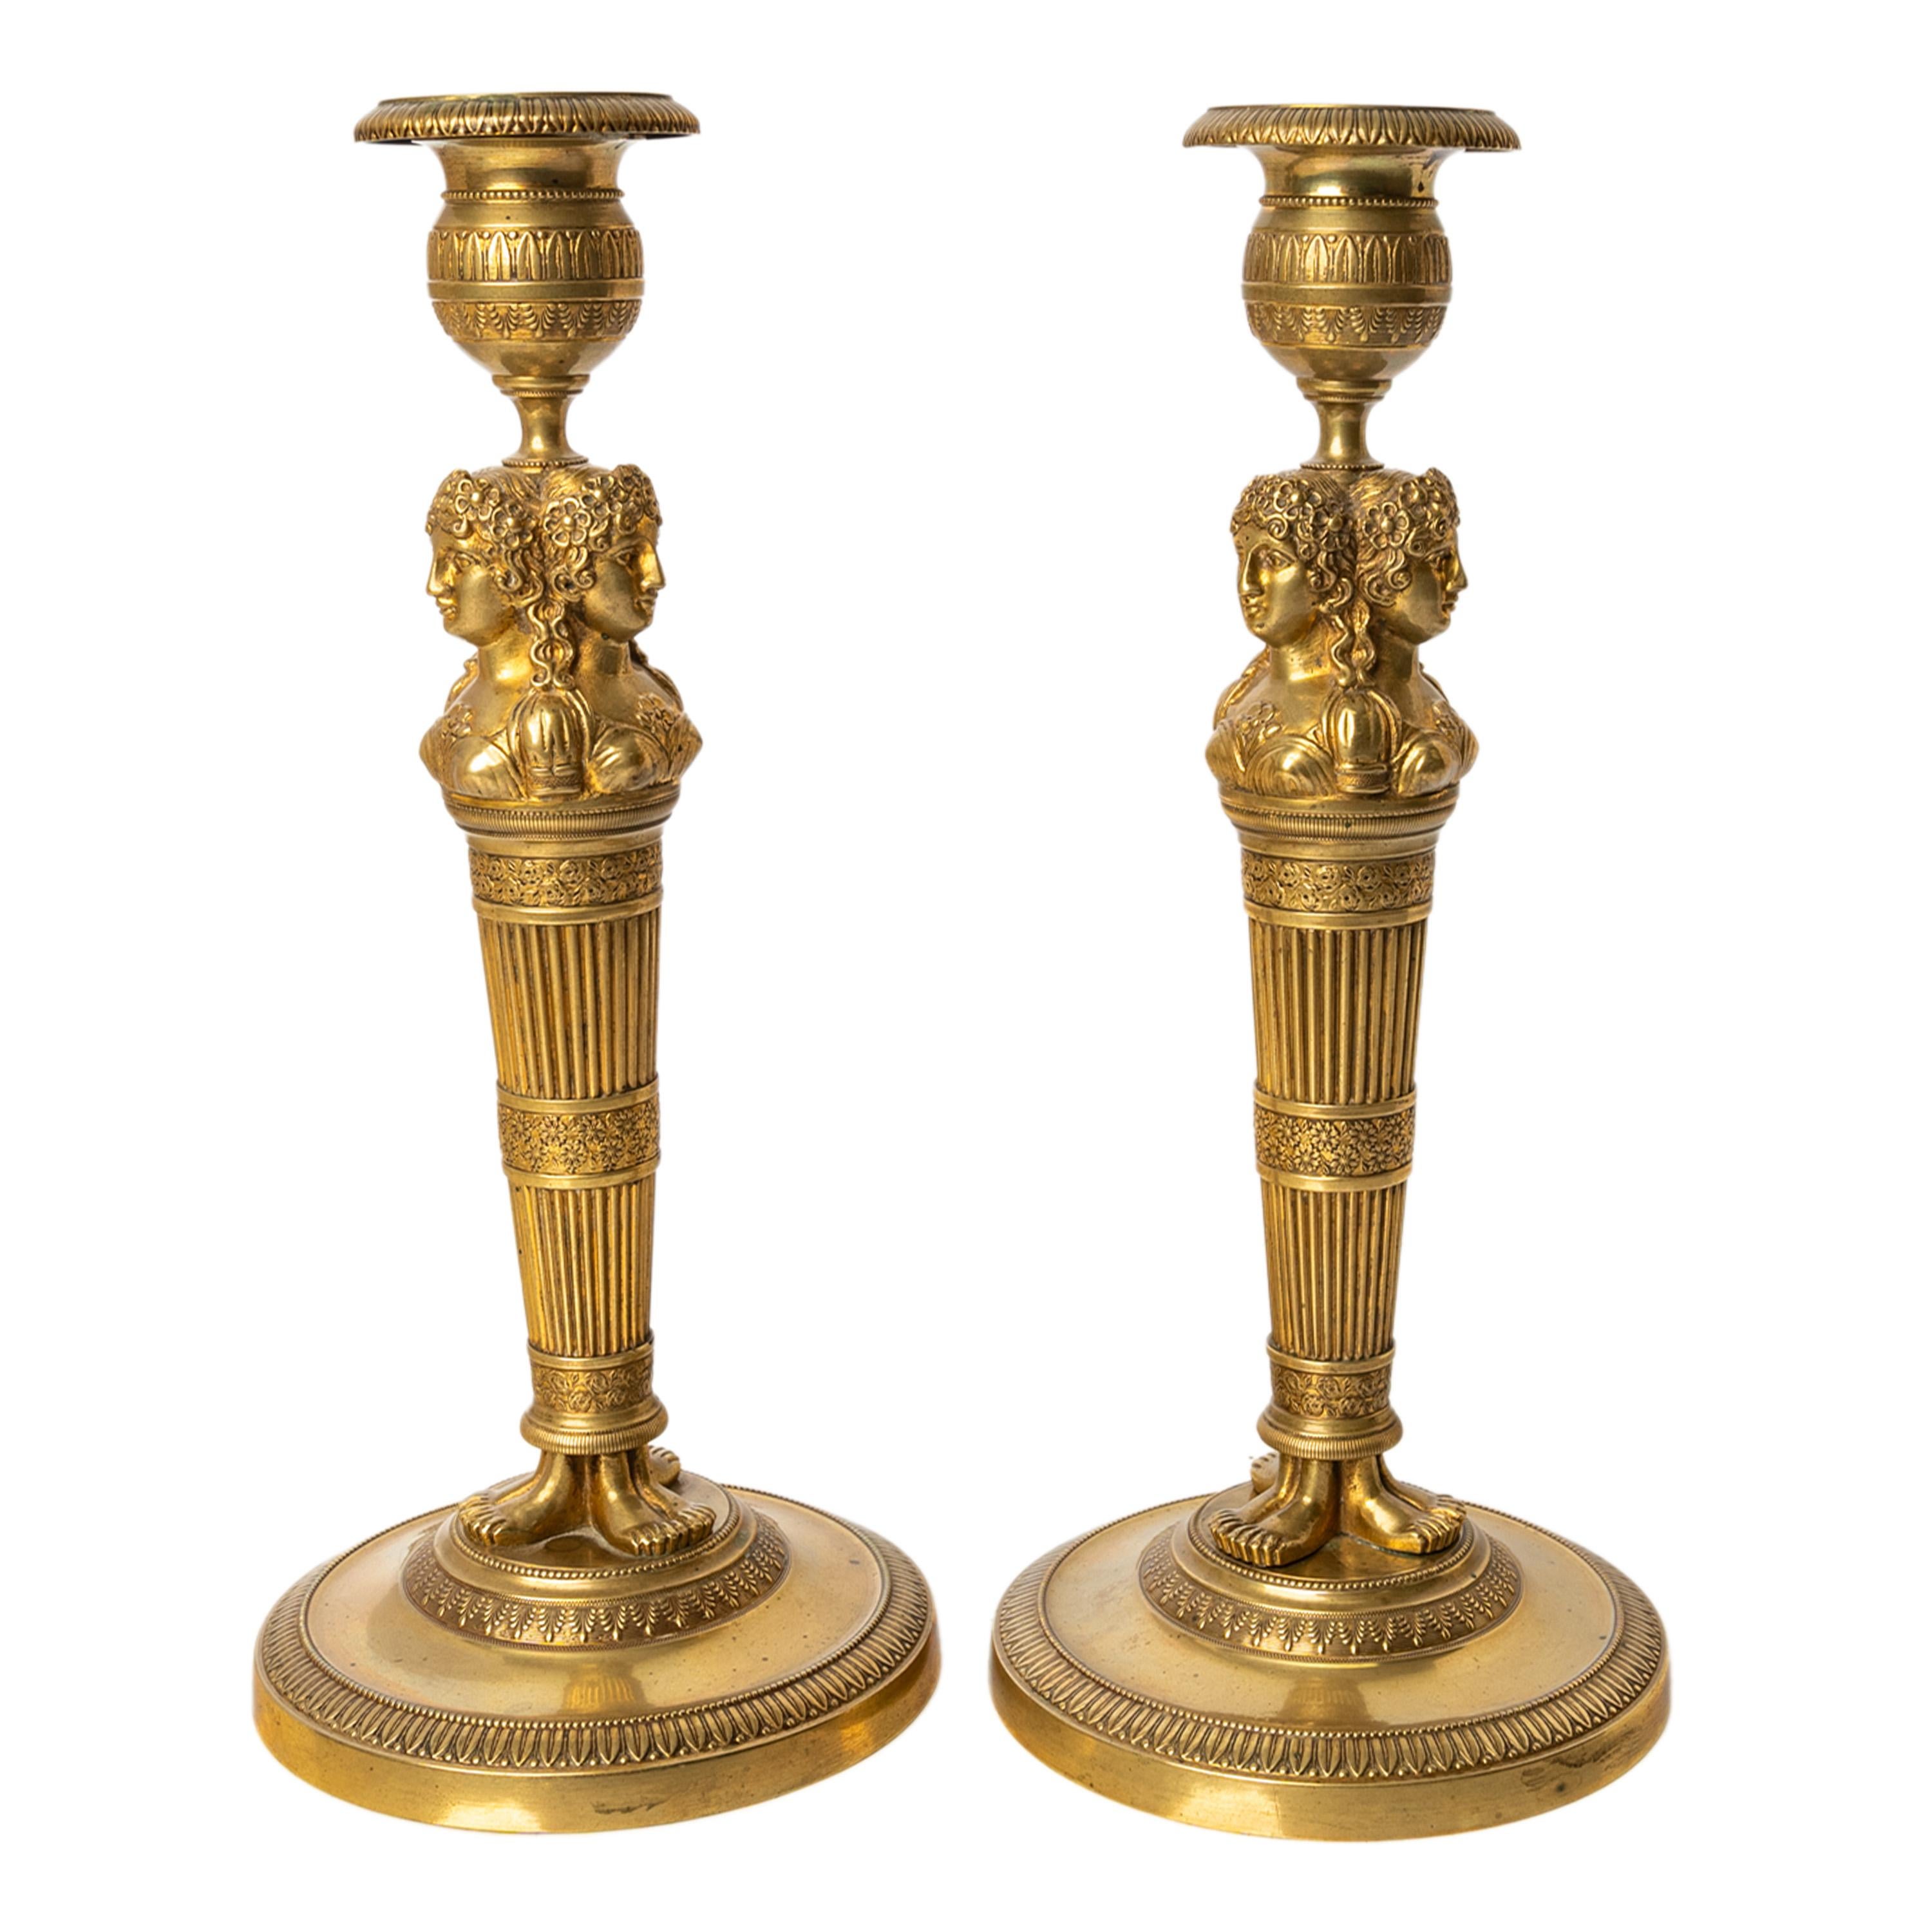 Pair Antique Early 19thC French Empire Neoclassical Gilt Bronze Candlesticks For Sale 4